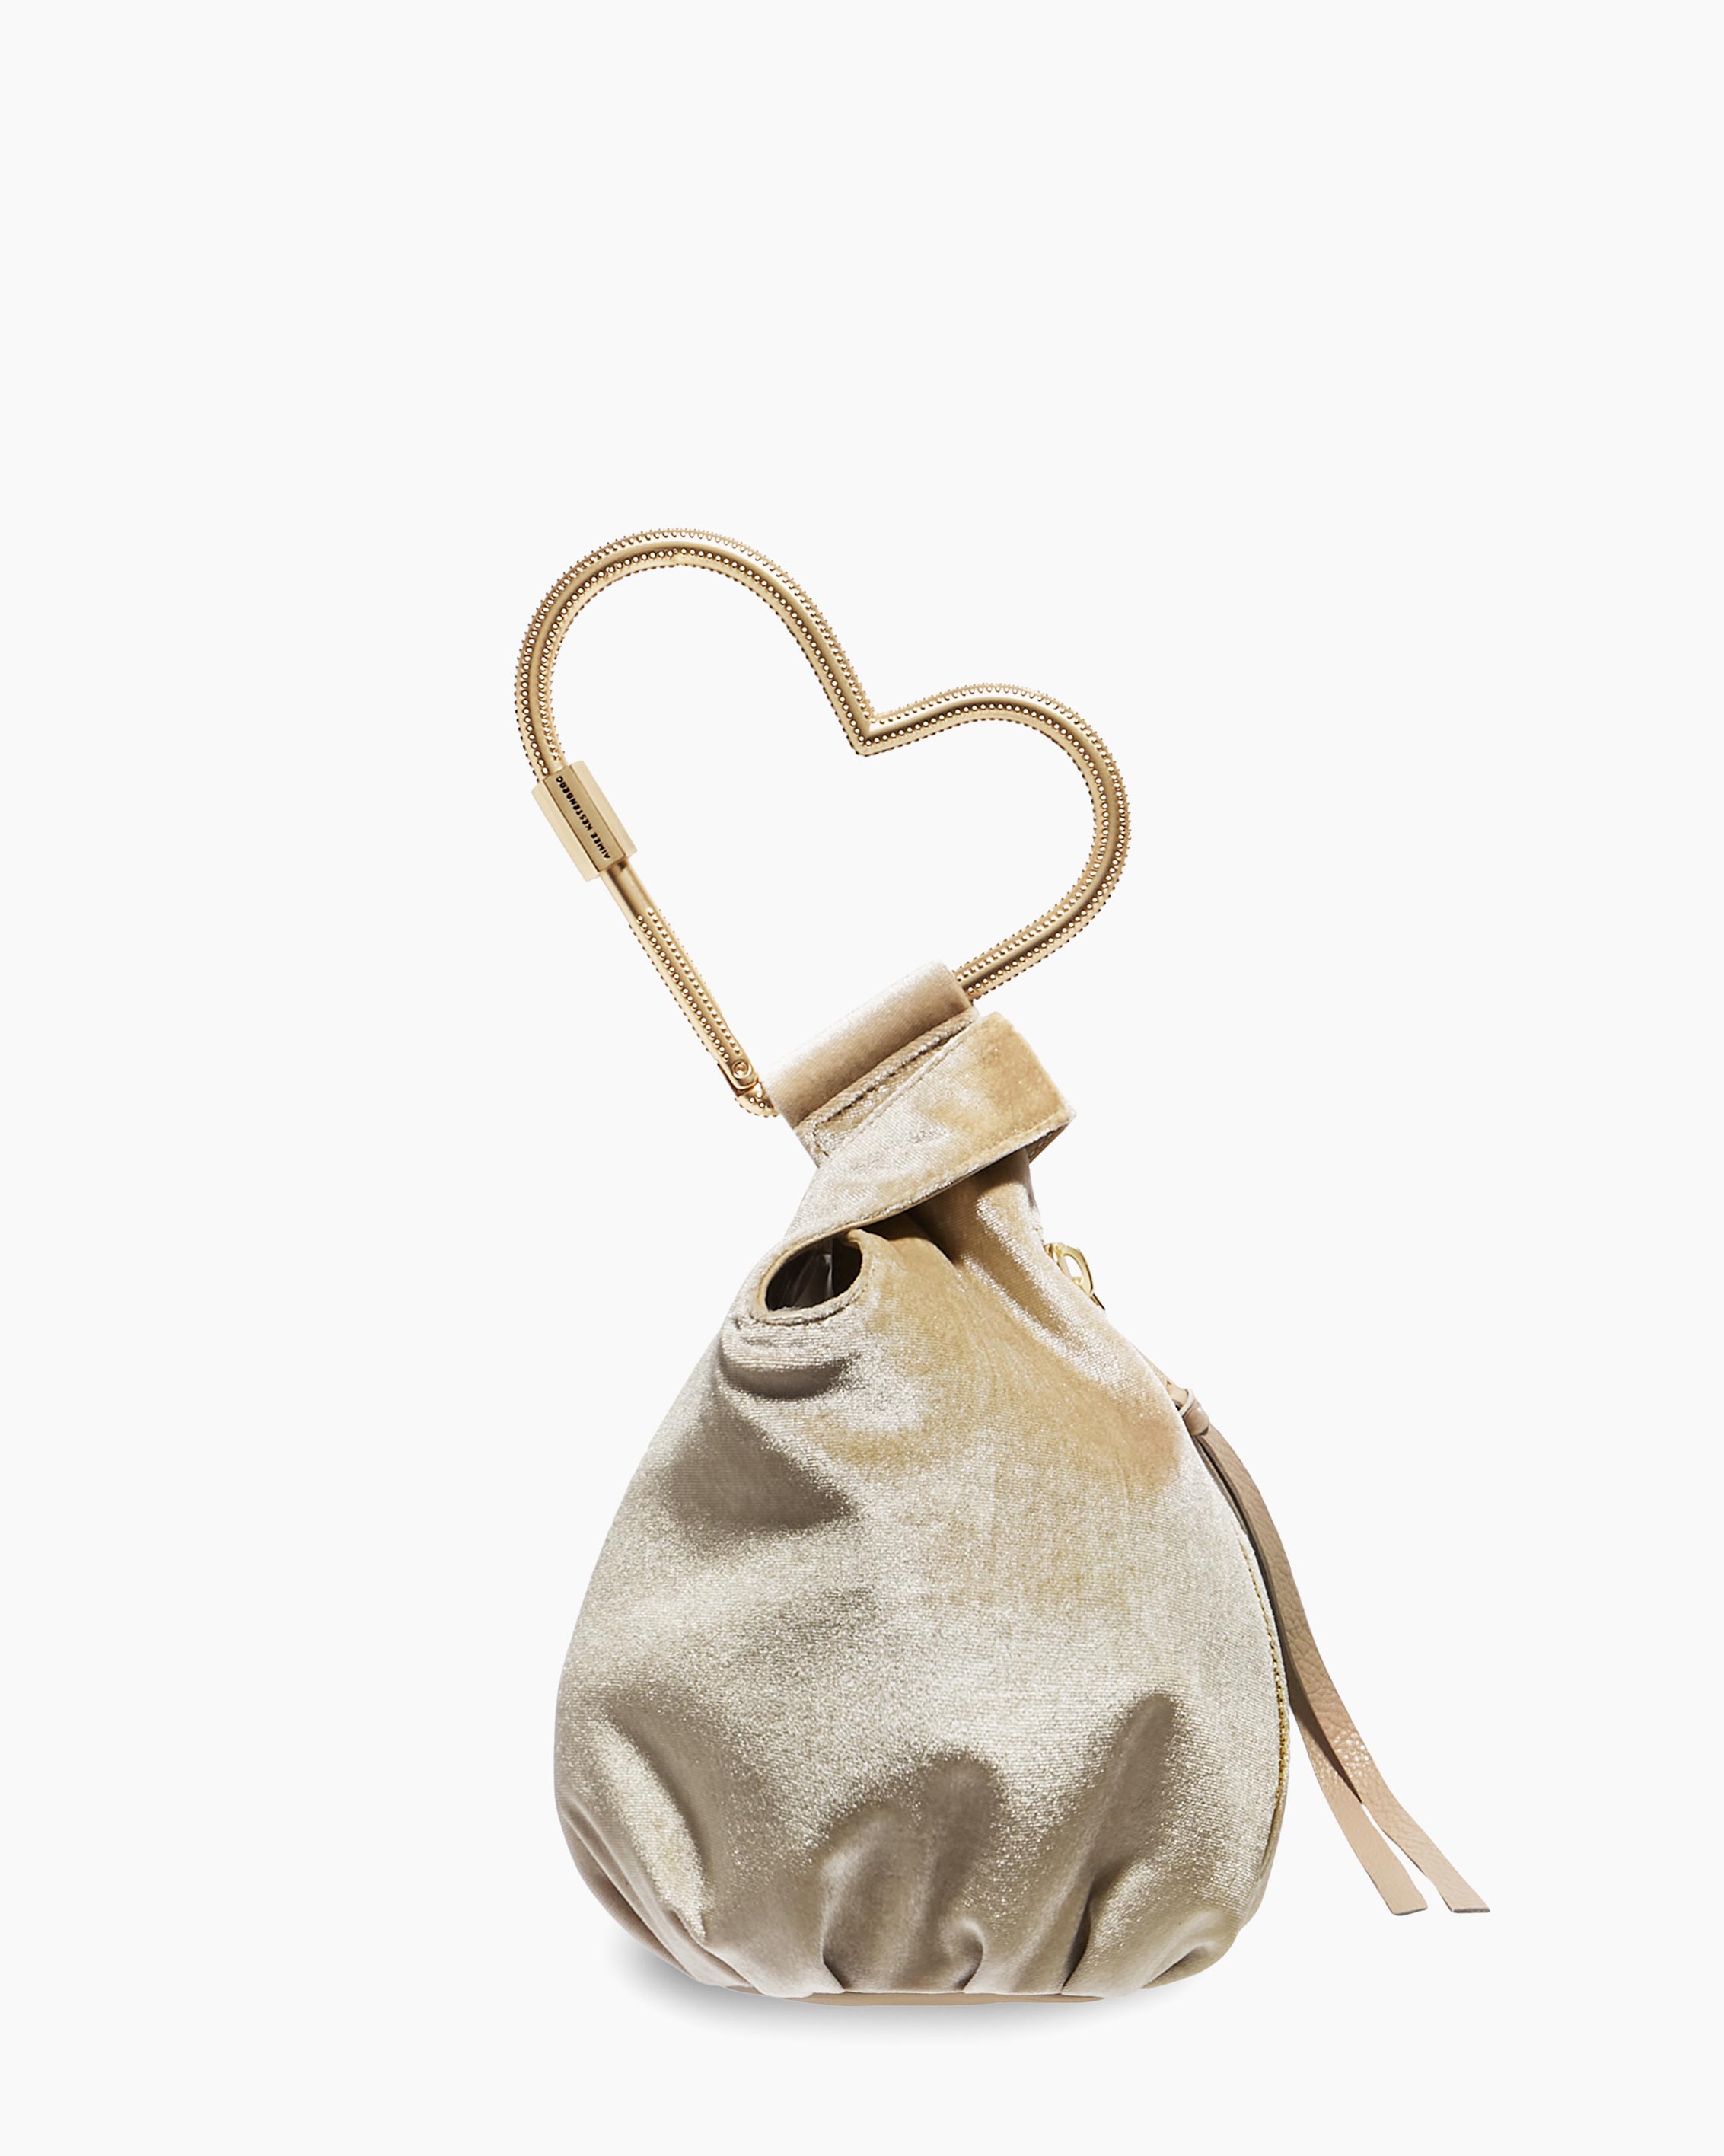 My Heart Handle With Care Eco-friendly Tote Bag 